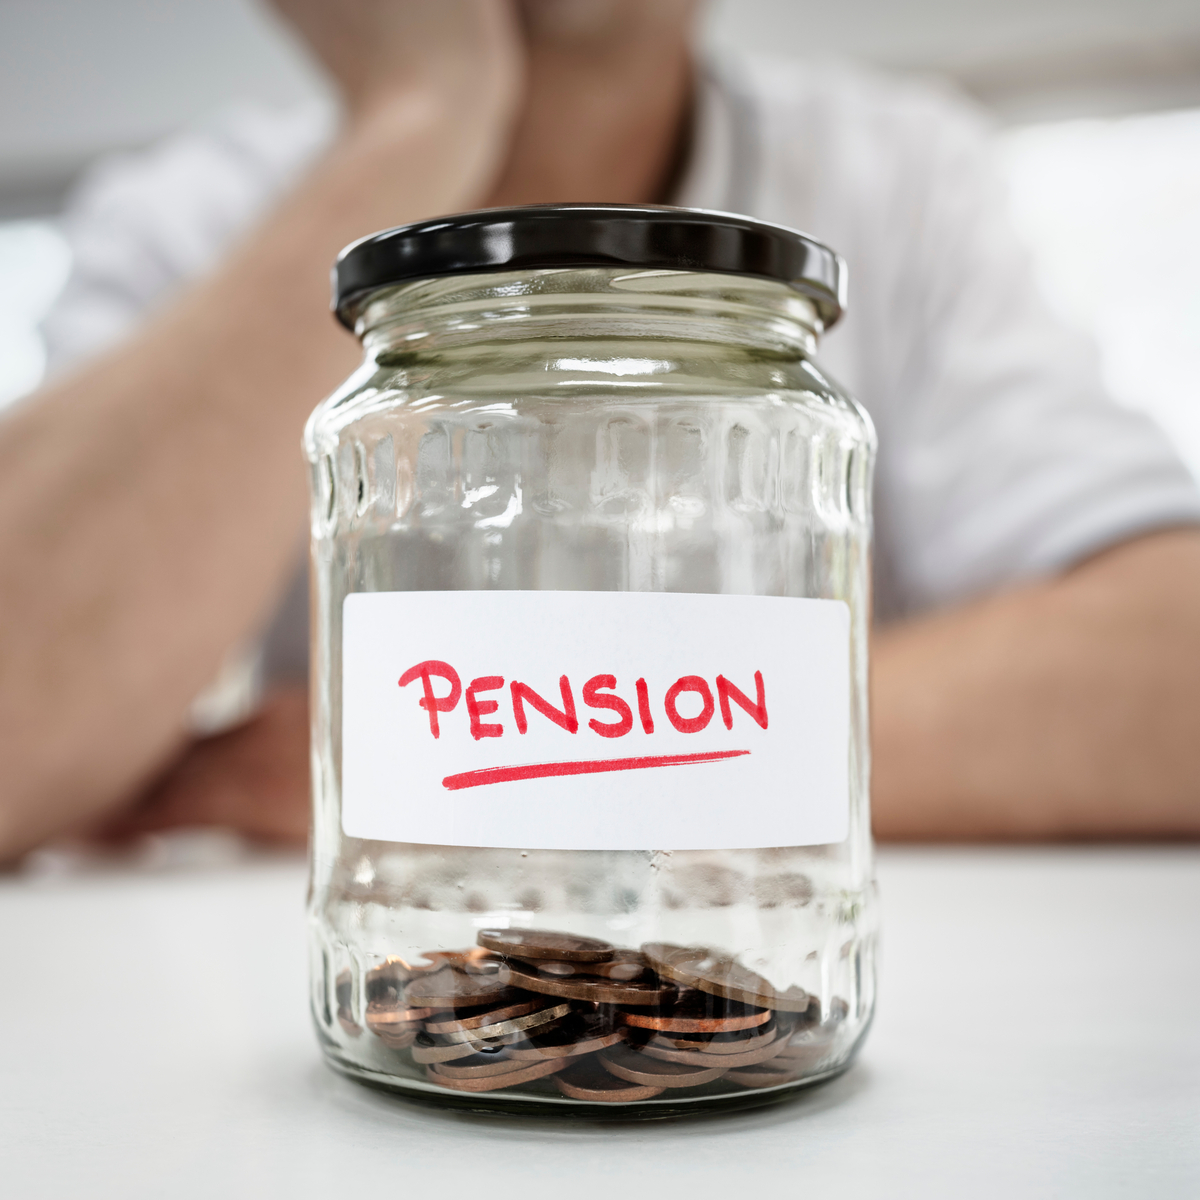 Six decisions that could ruin your retirement